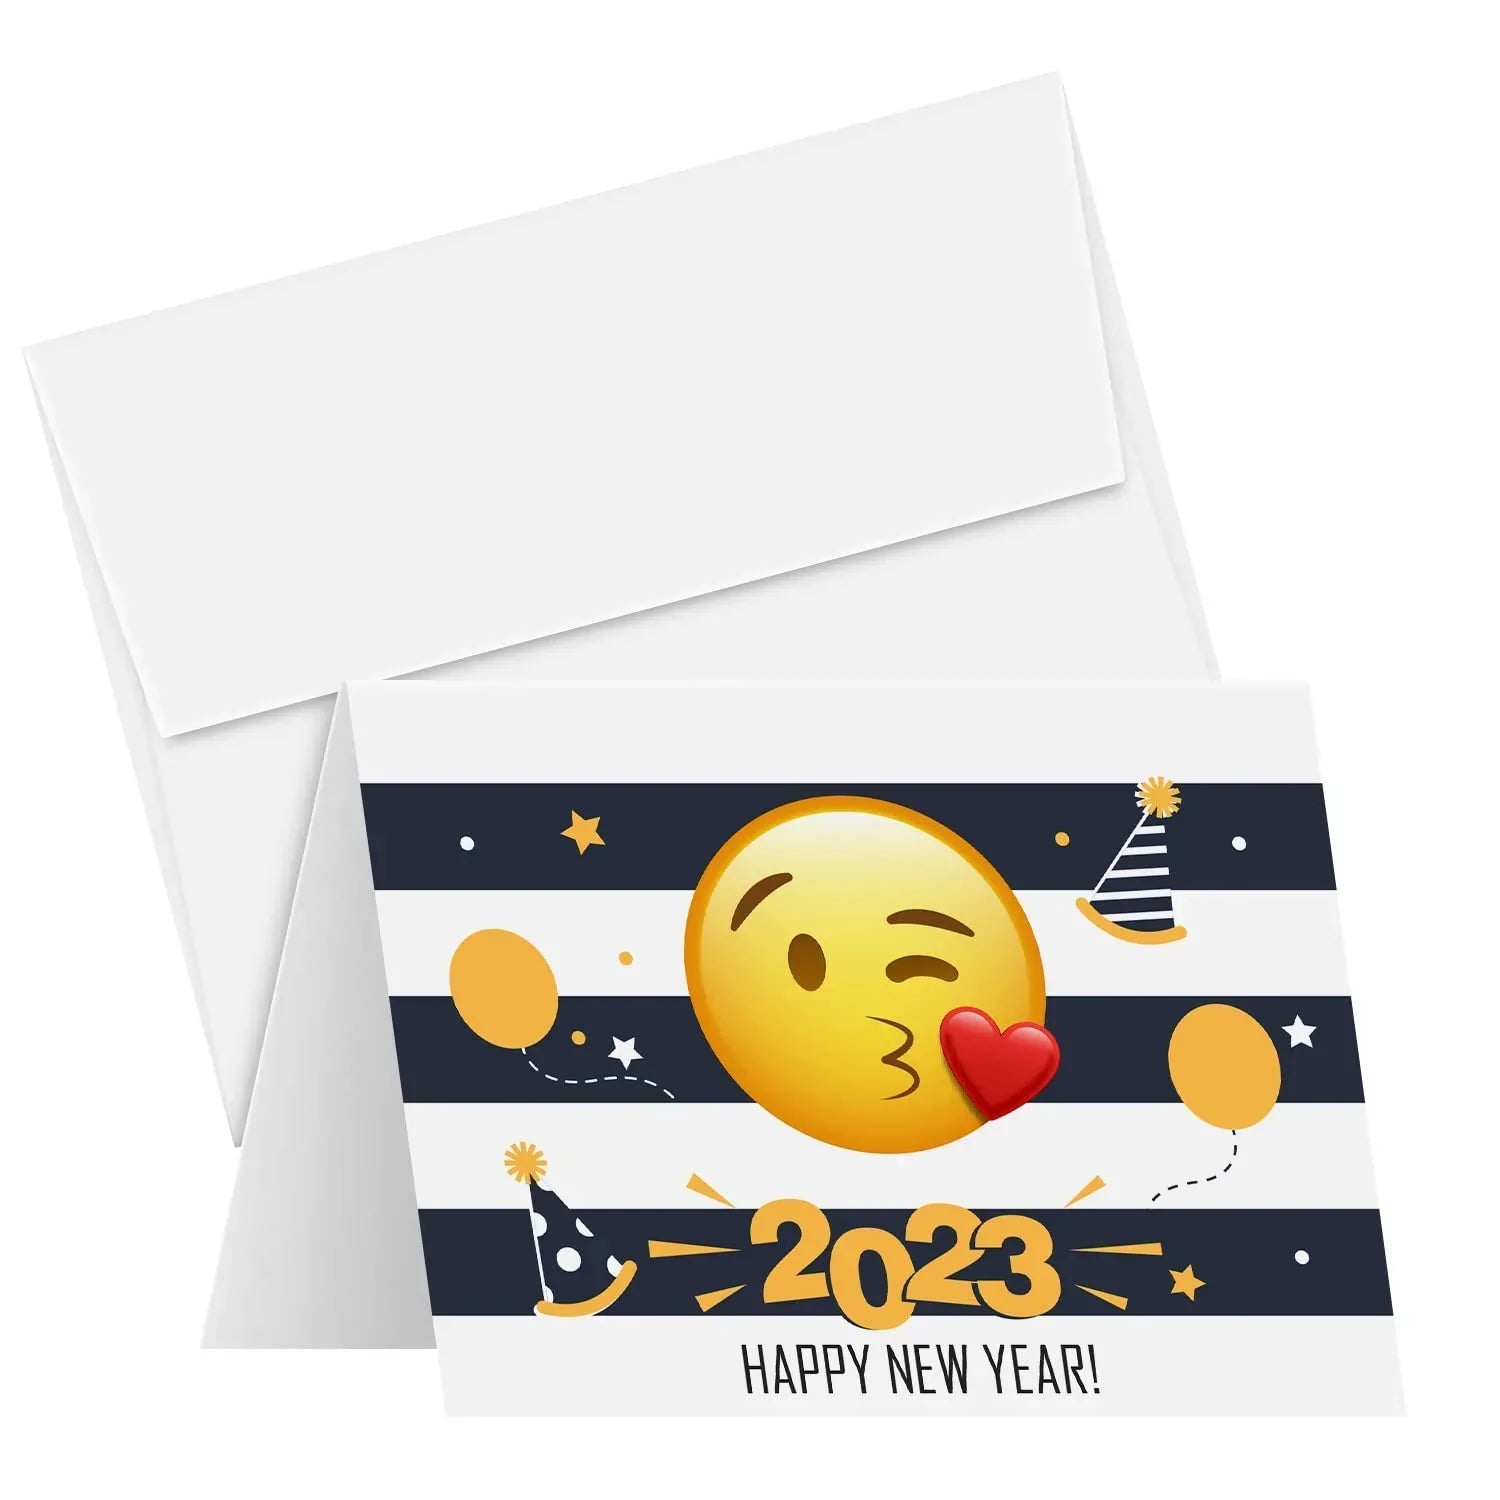 2023 Have A Happy New Year Cards Holiday Love Greetings Emoji. Set of 25 FoldCard